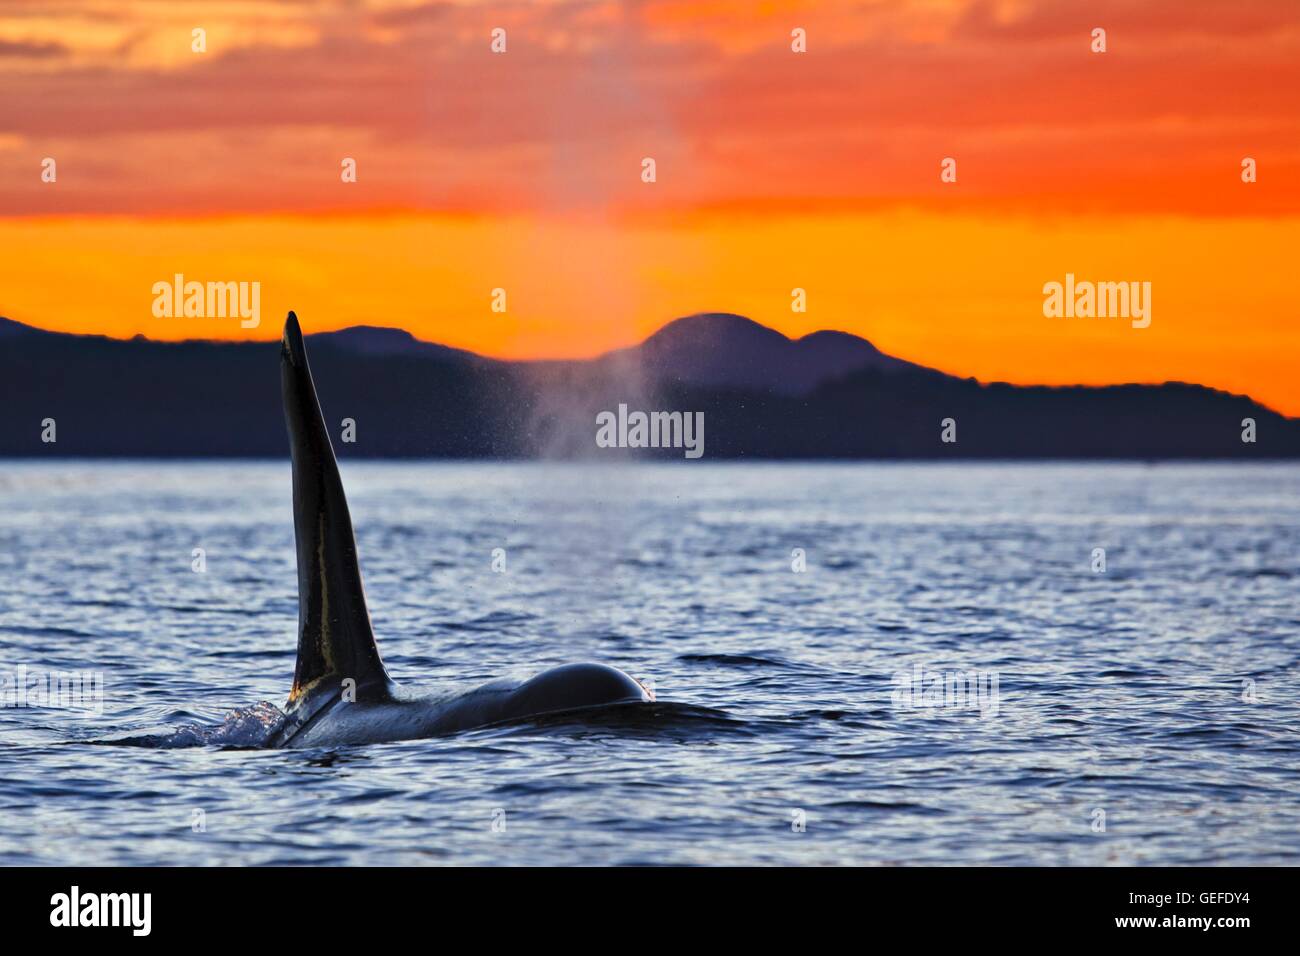 Zoology / animals, mammal / mammalian, Orca Whale male in Waynton Pass during sunset, Killer Whales off Northern Vancouver Island, British Columbia, Orcas at sunset, Canada, Stock Photo